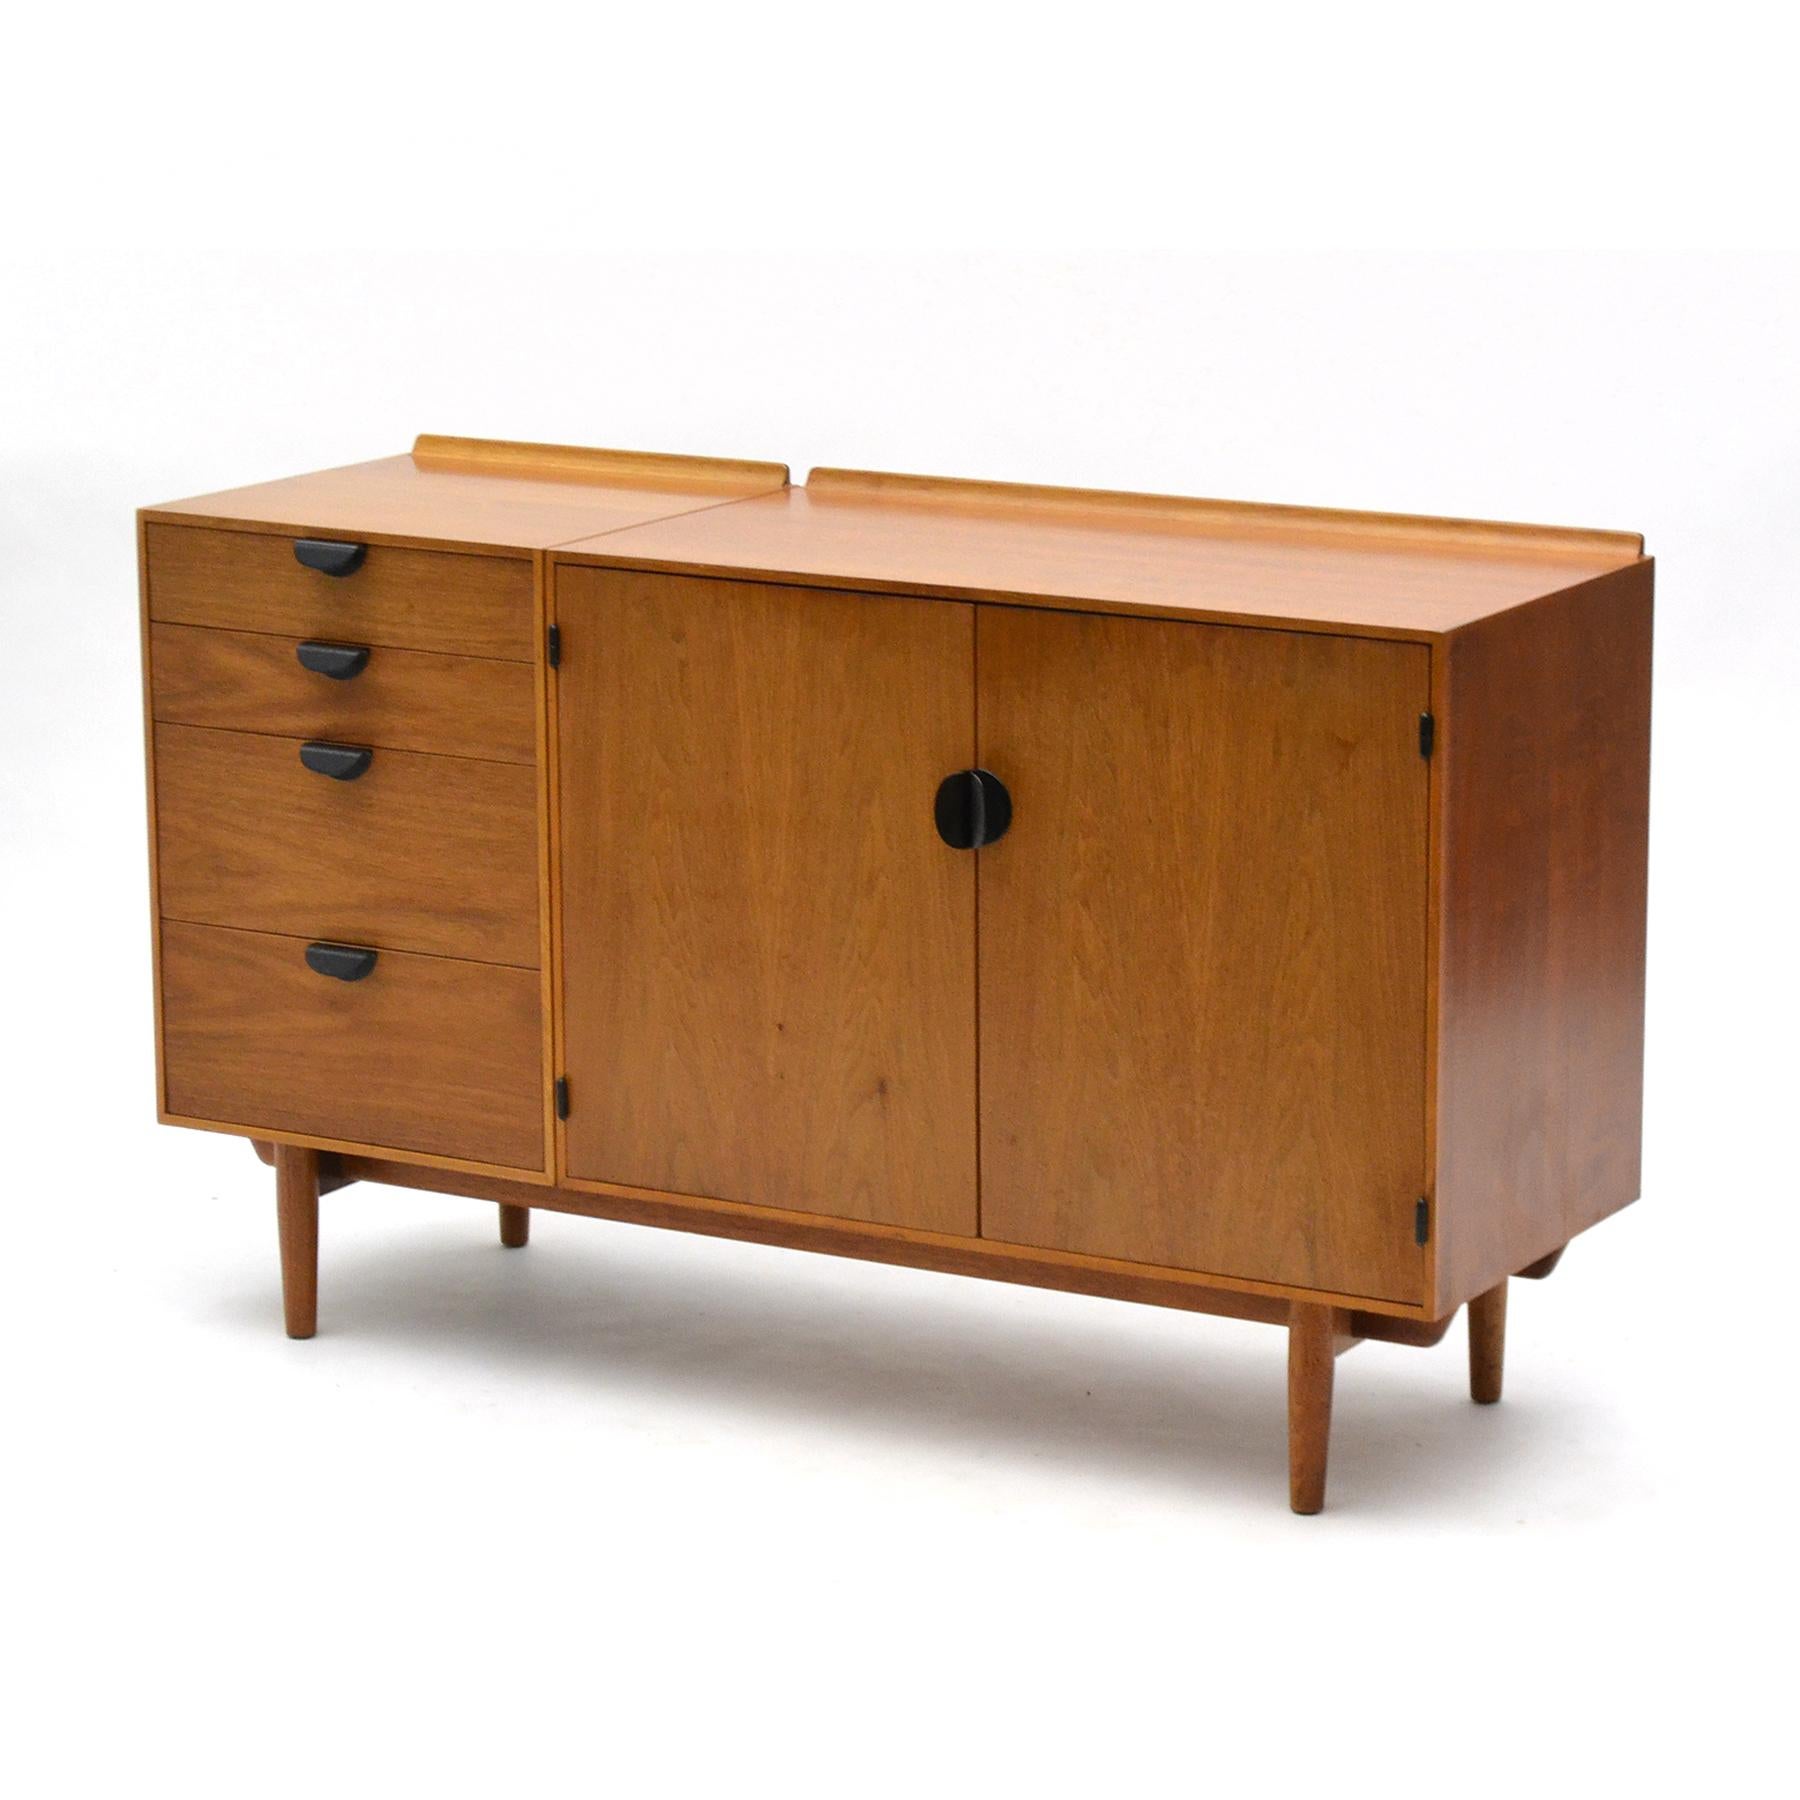 A beautiful and highly functional design by Finn Juhl expertly crafted by Baker Furniture in the 1950s, this credenza has two cabinet components supported by an undercarriage base. The left cabinet has four drawers (two shallow, two deep) while the